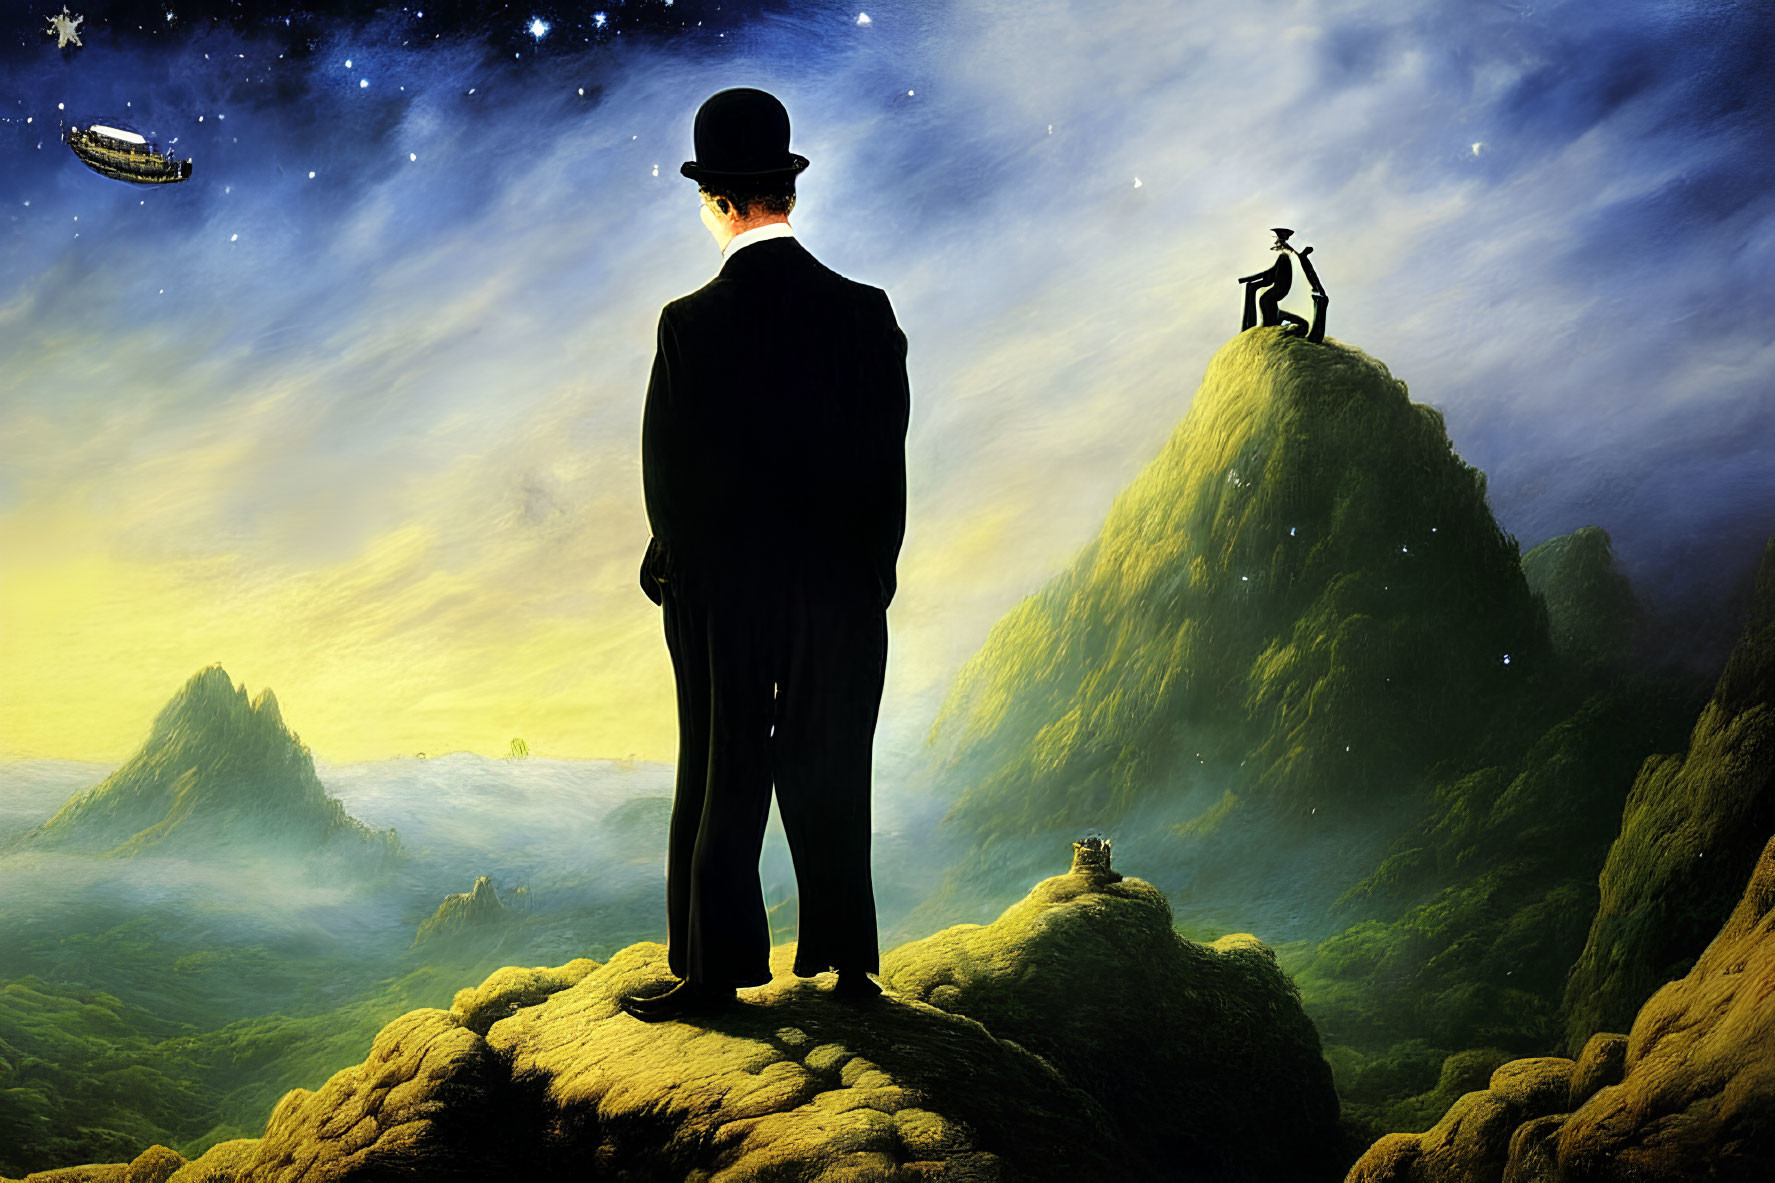 Man in suit on verdant hill gazes at surreal mountains under starry sky with floating ship.